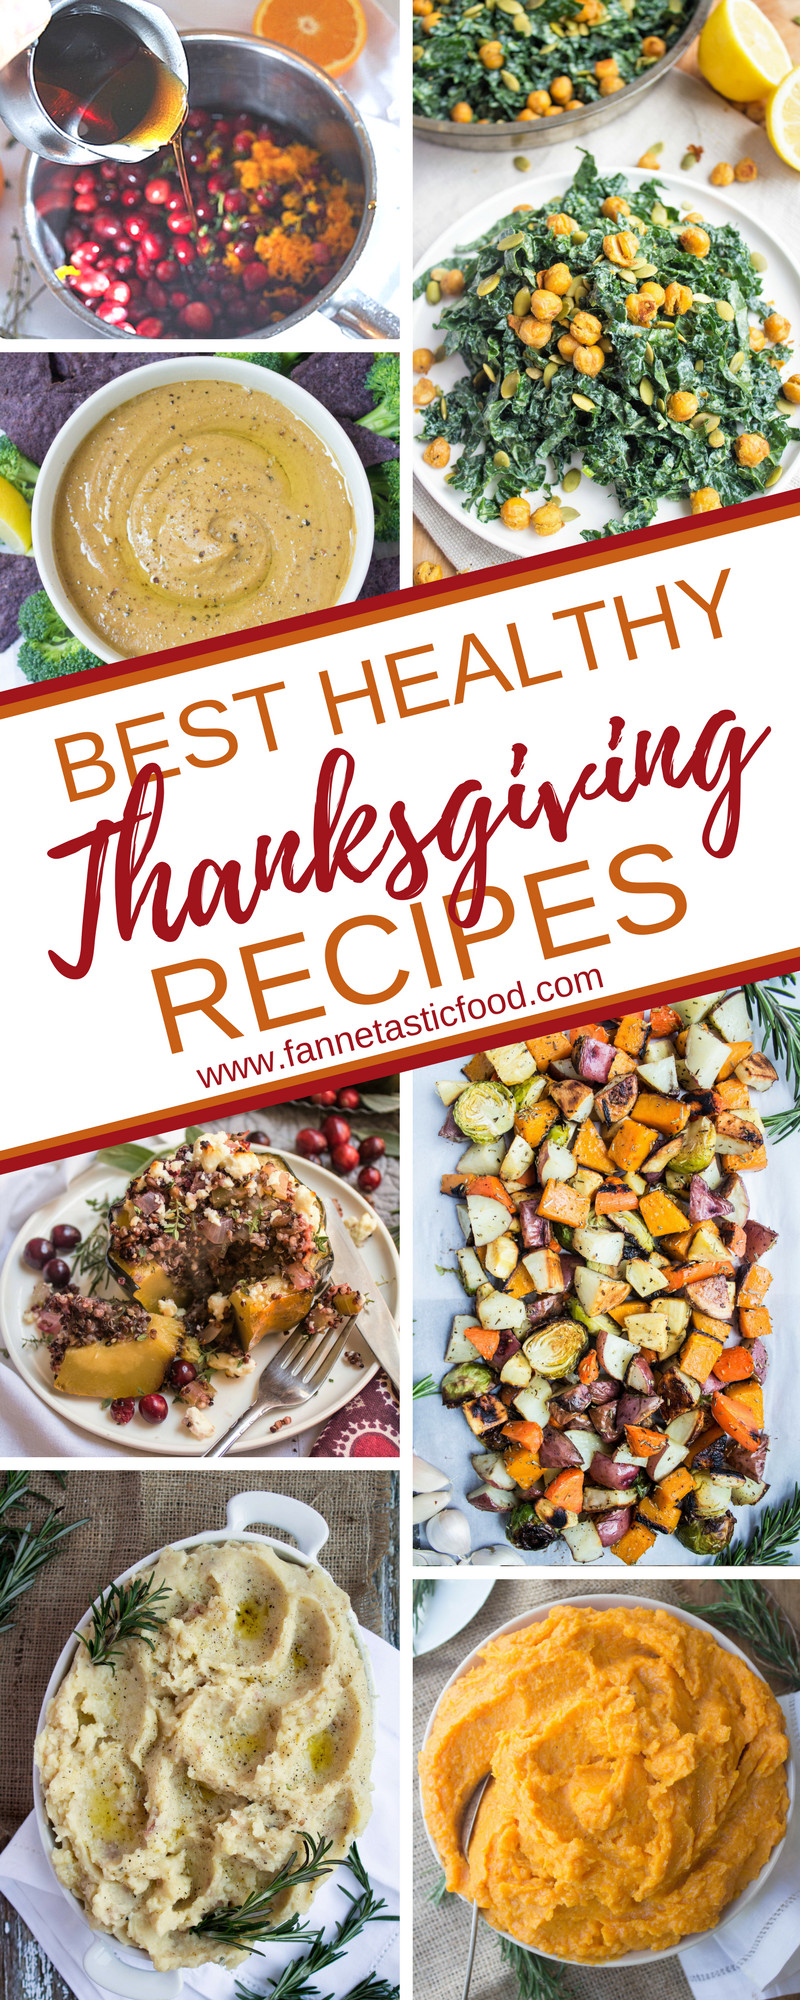 Healthy Thanksgiving Recipes
 Best Healthy Thanksgiving Recipes